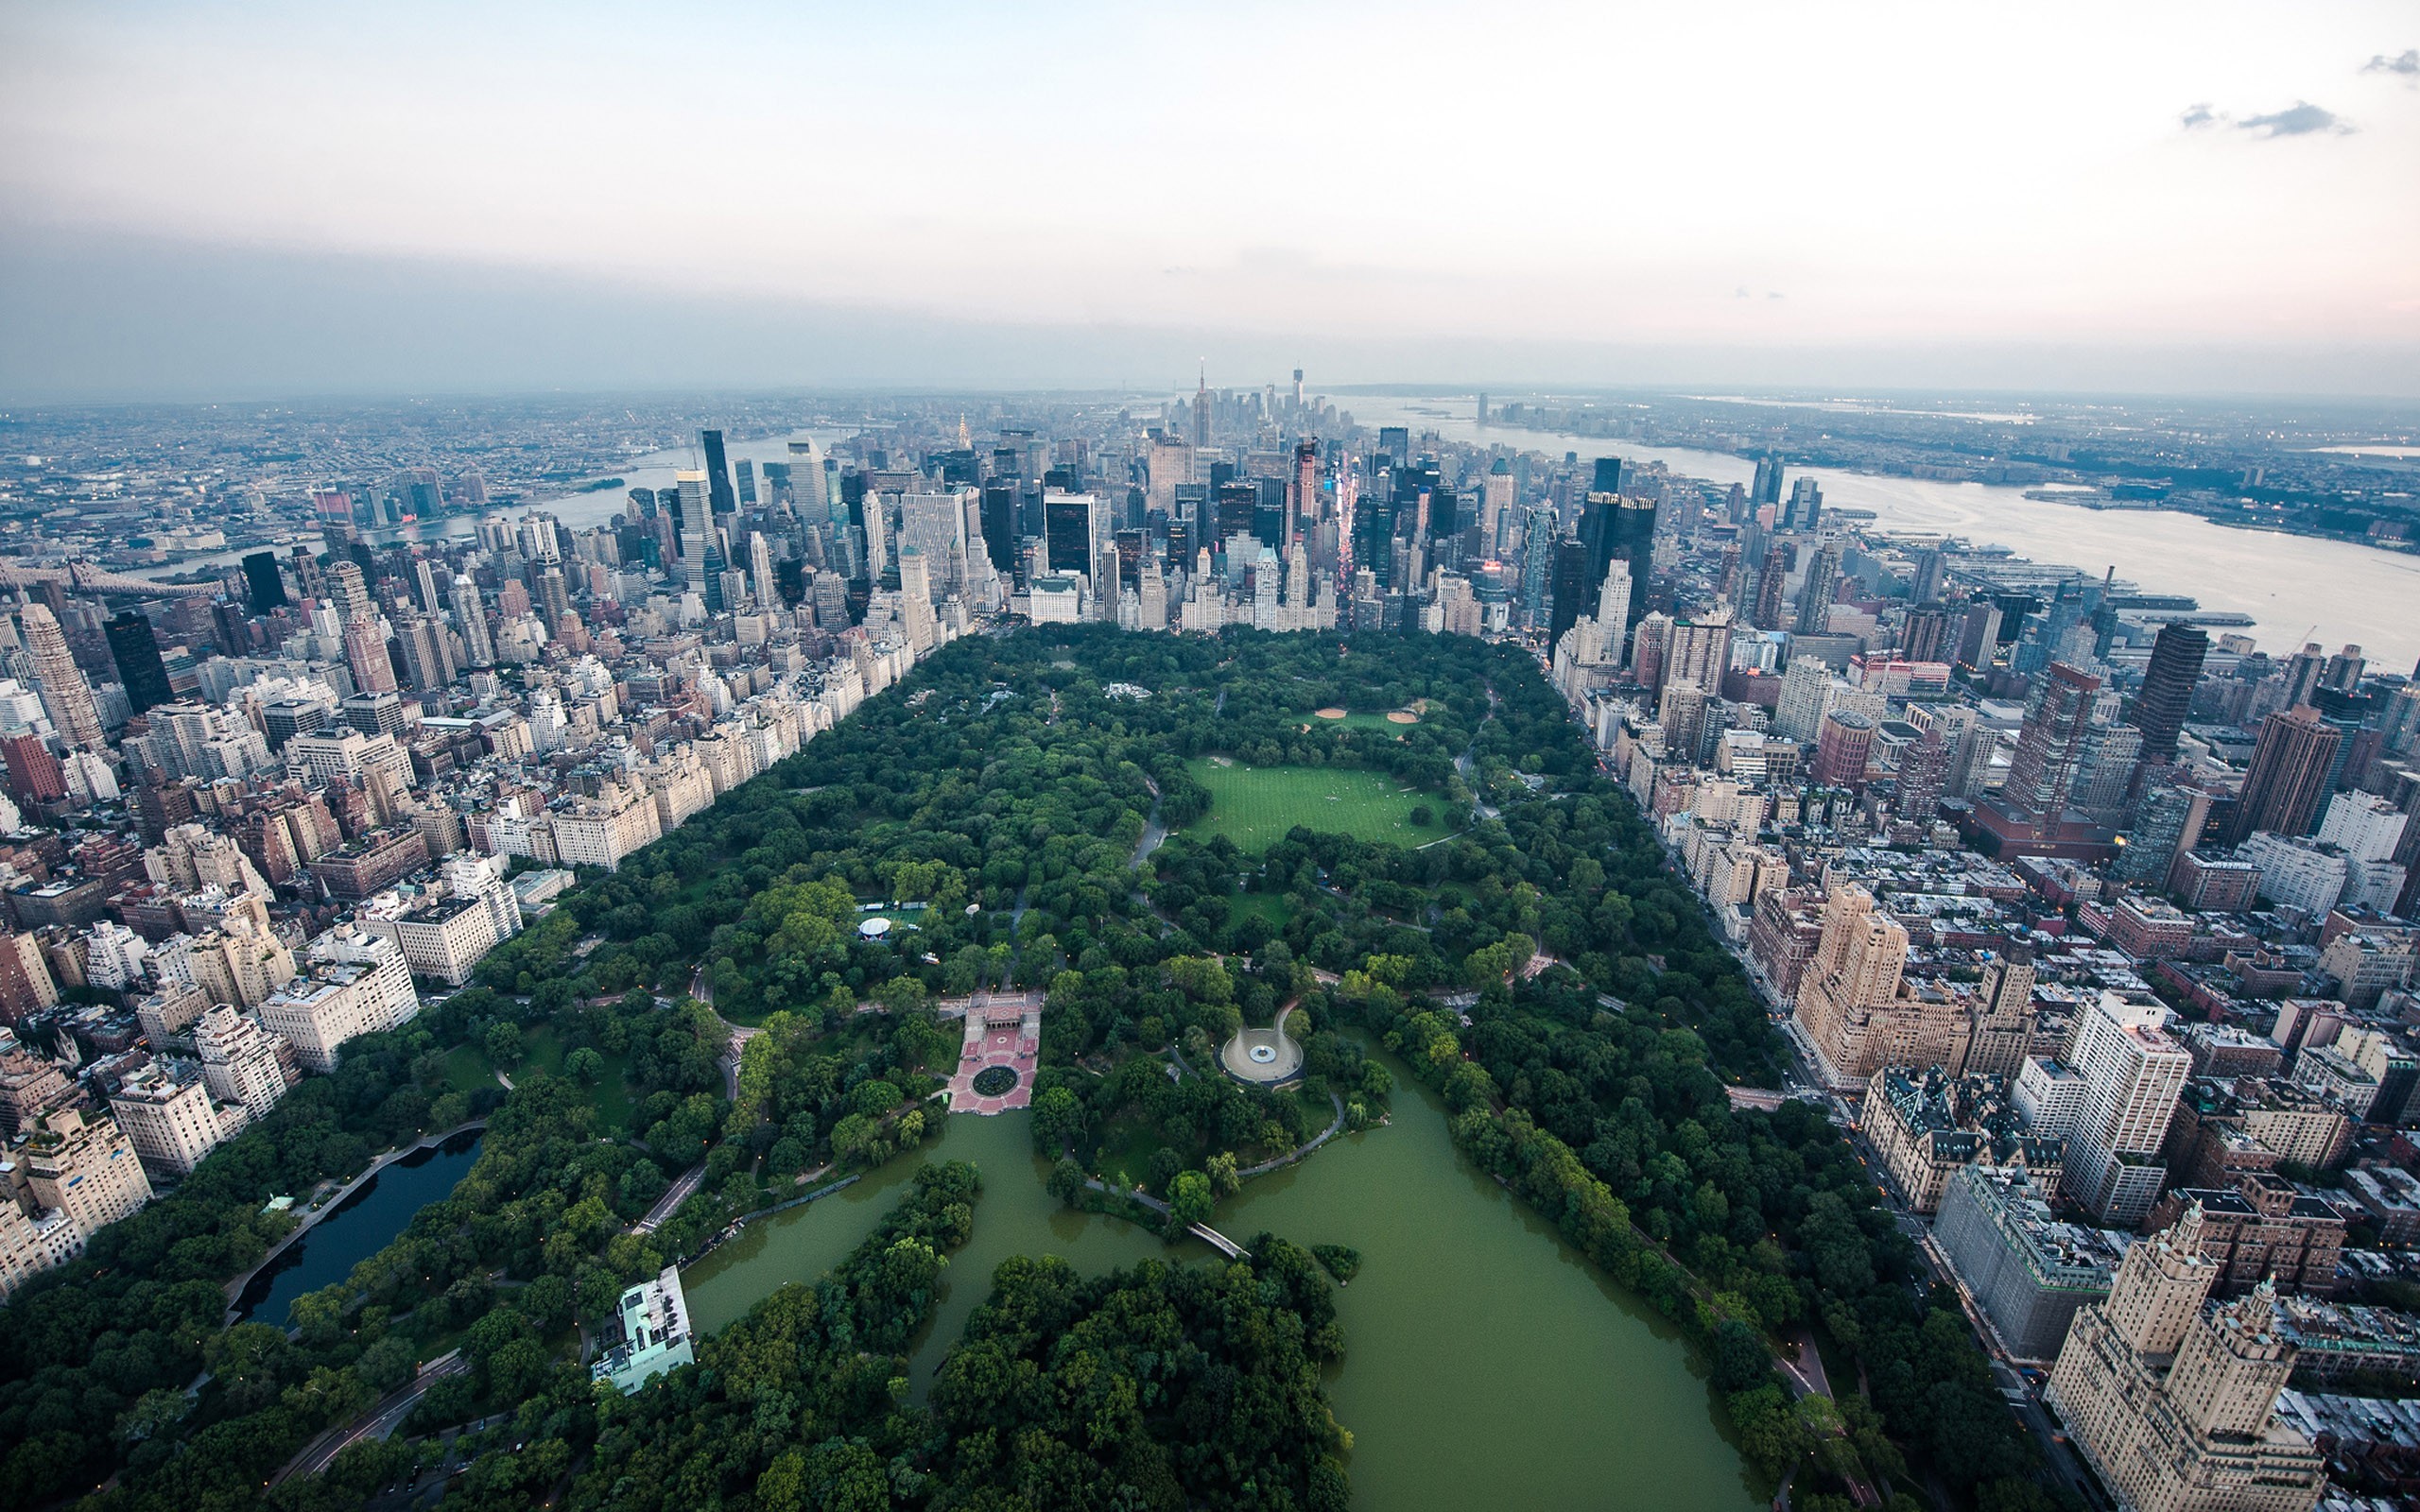 #aerial view, #cityscape, #Central Park, #USA, #New York